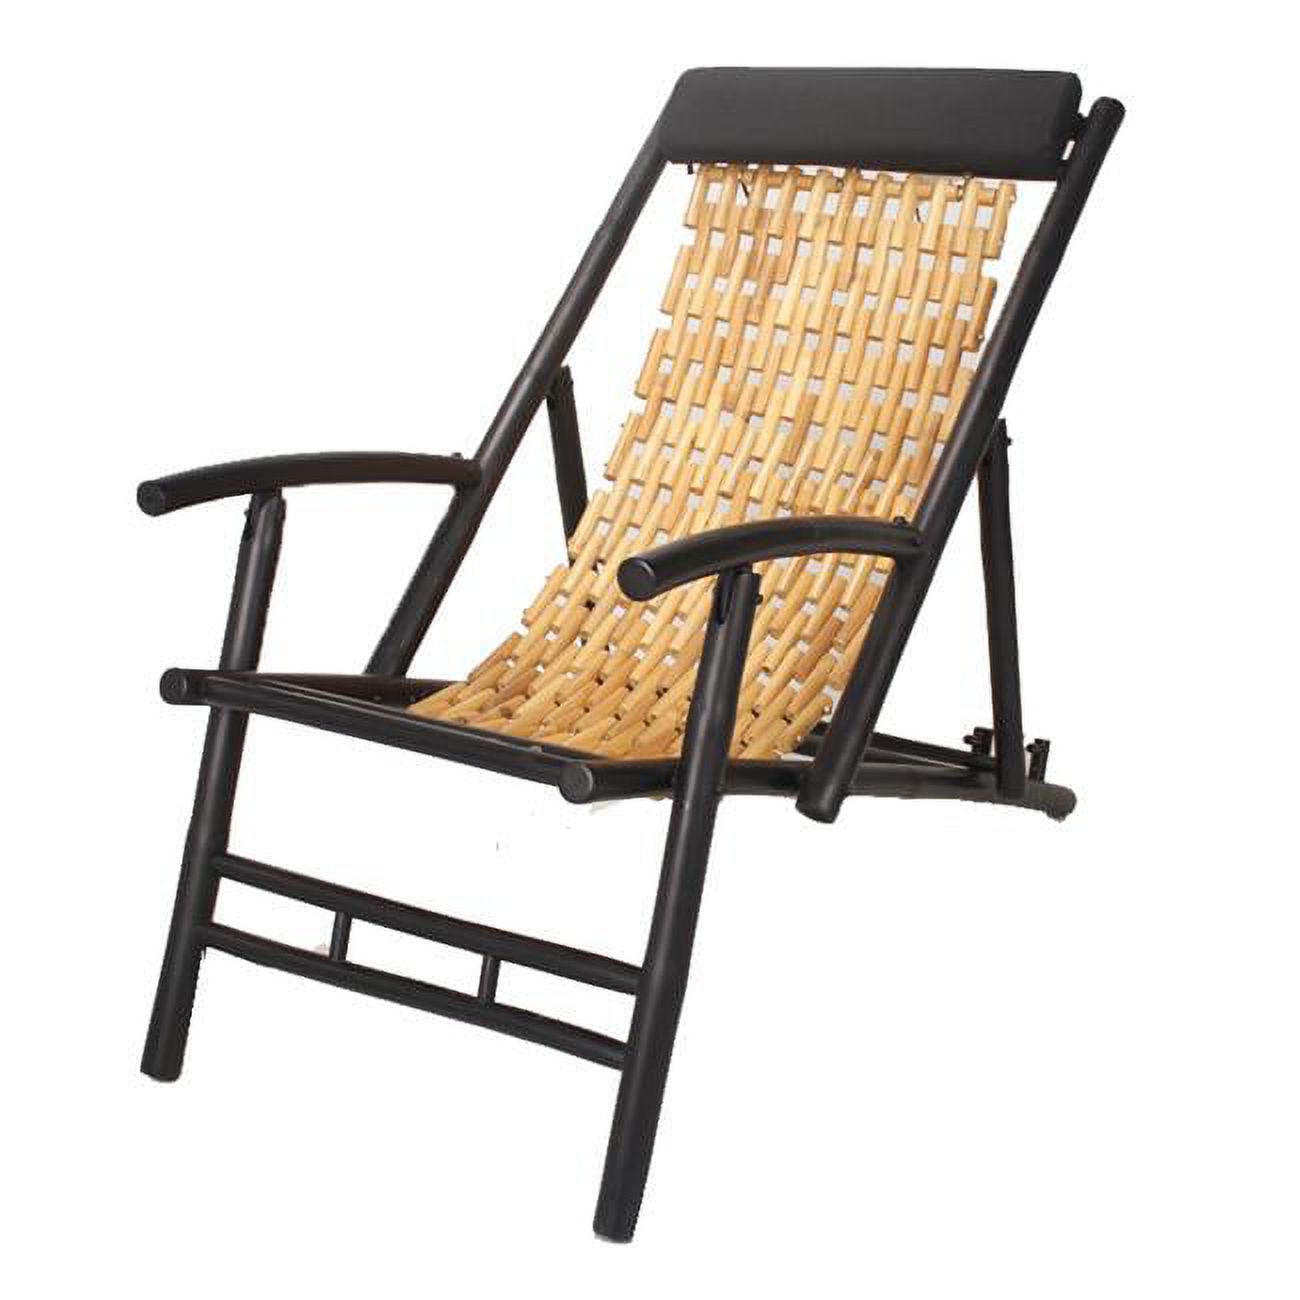 Heather Ann Creations W27048-BLKN Hilo Bamboo Folding Sling Chair - Black & Natural - image 1 of 2